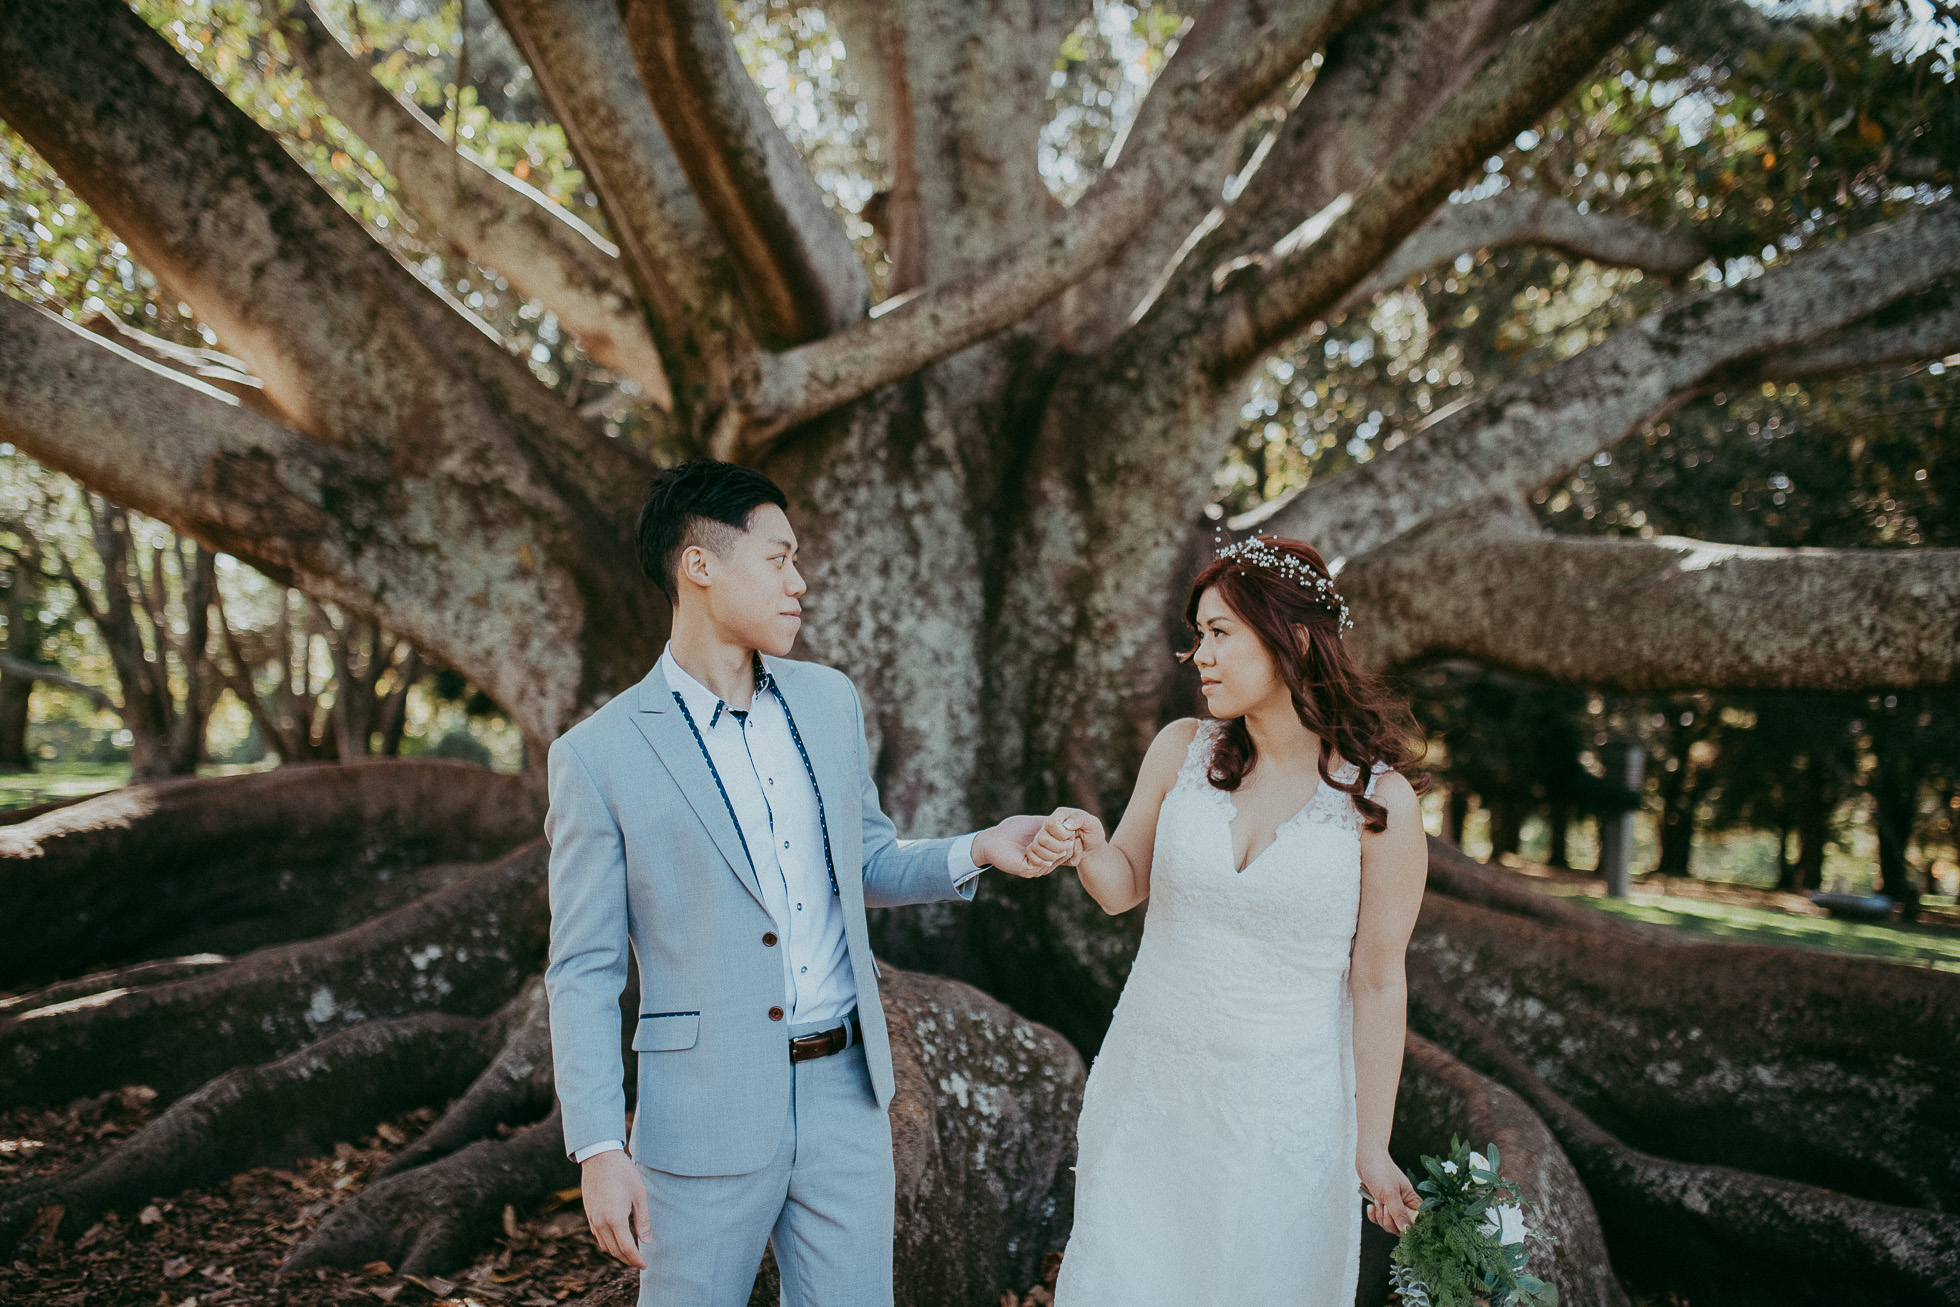 Pre-wedding West Auckland + Domain Auckland photo shoot {wedding | engagement photography}